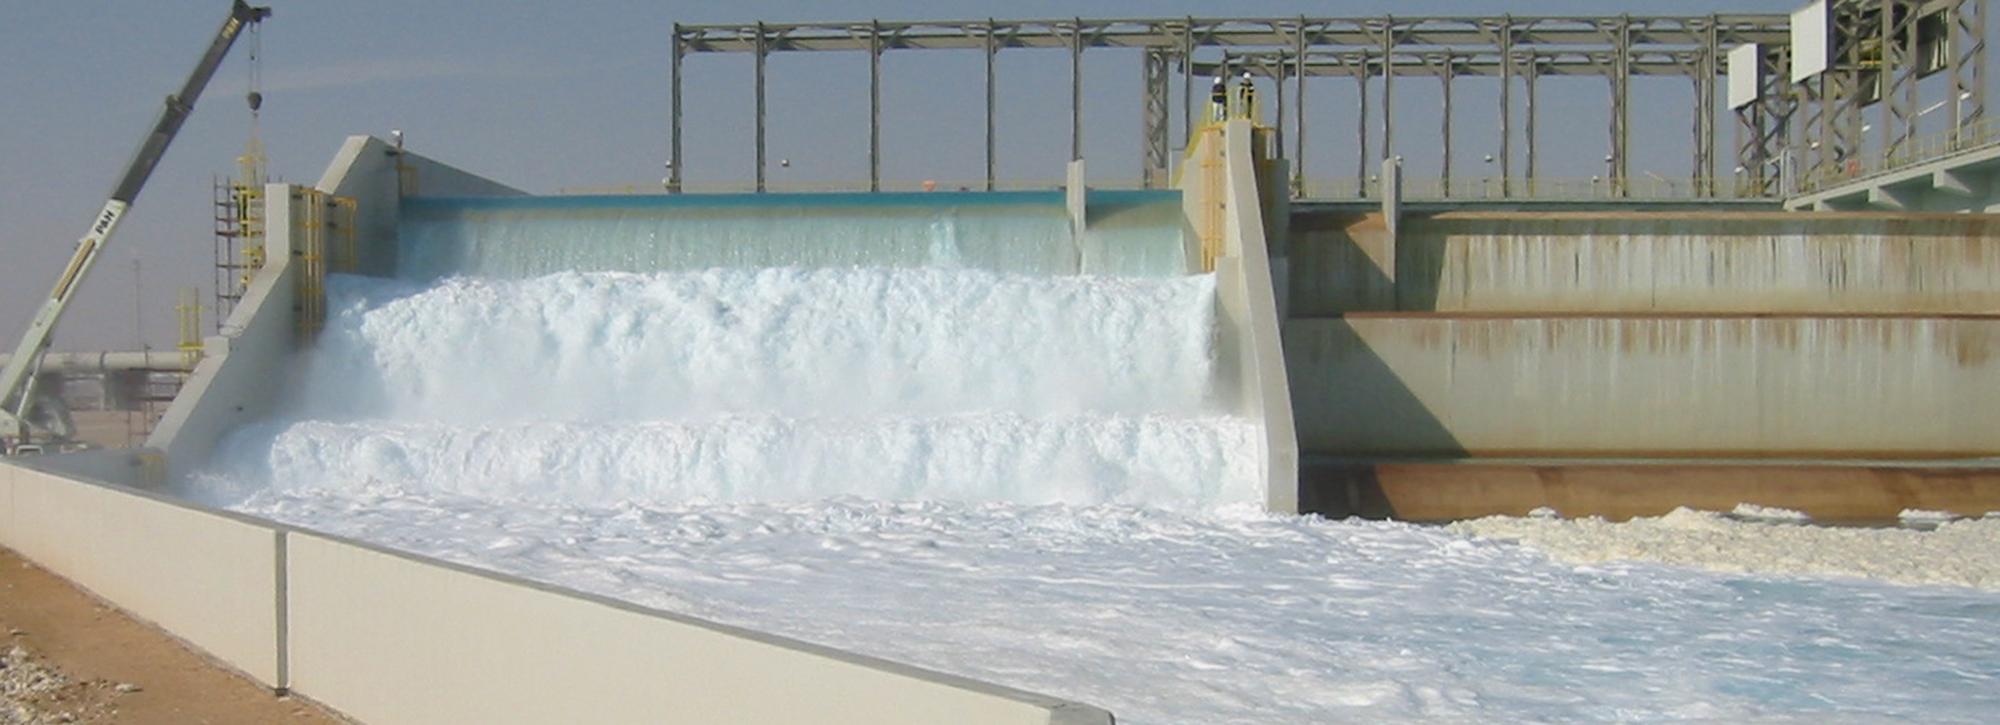 view of a water outfall